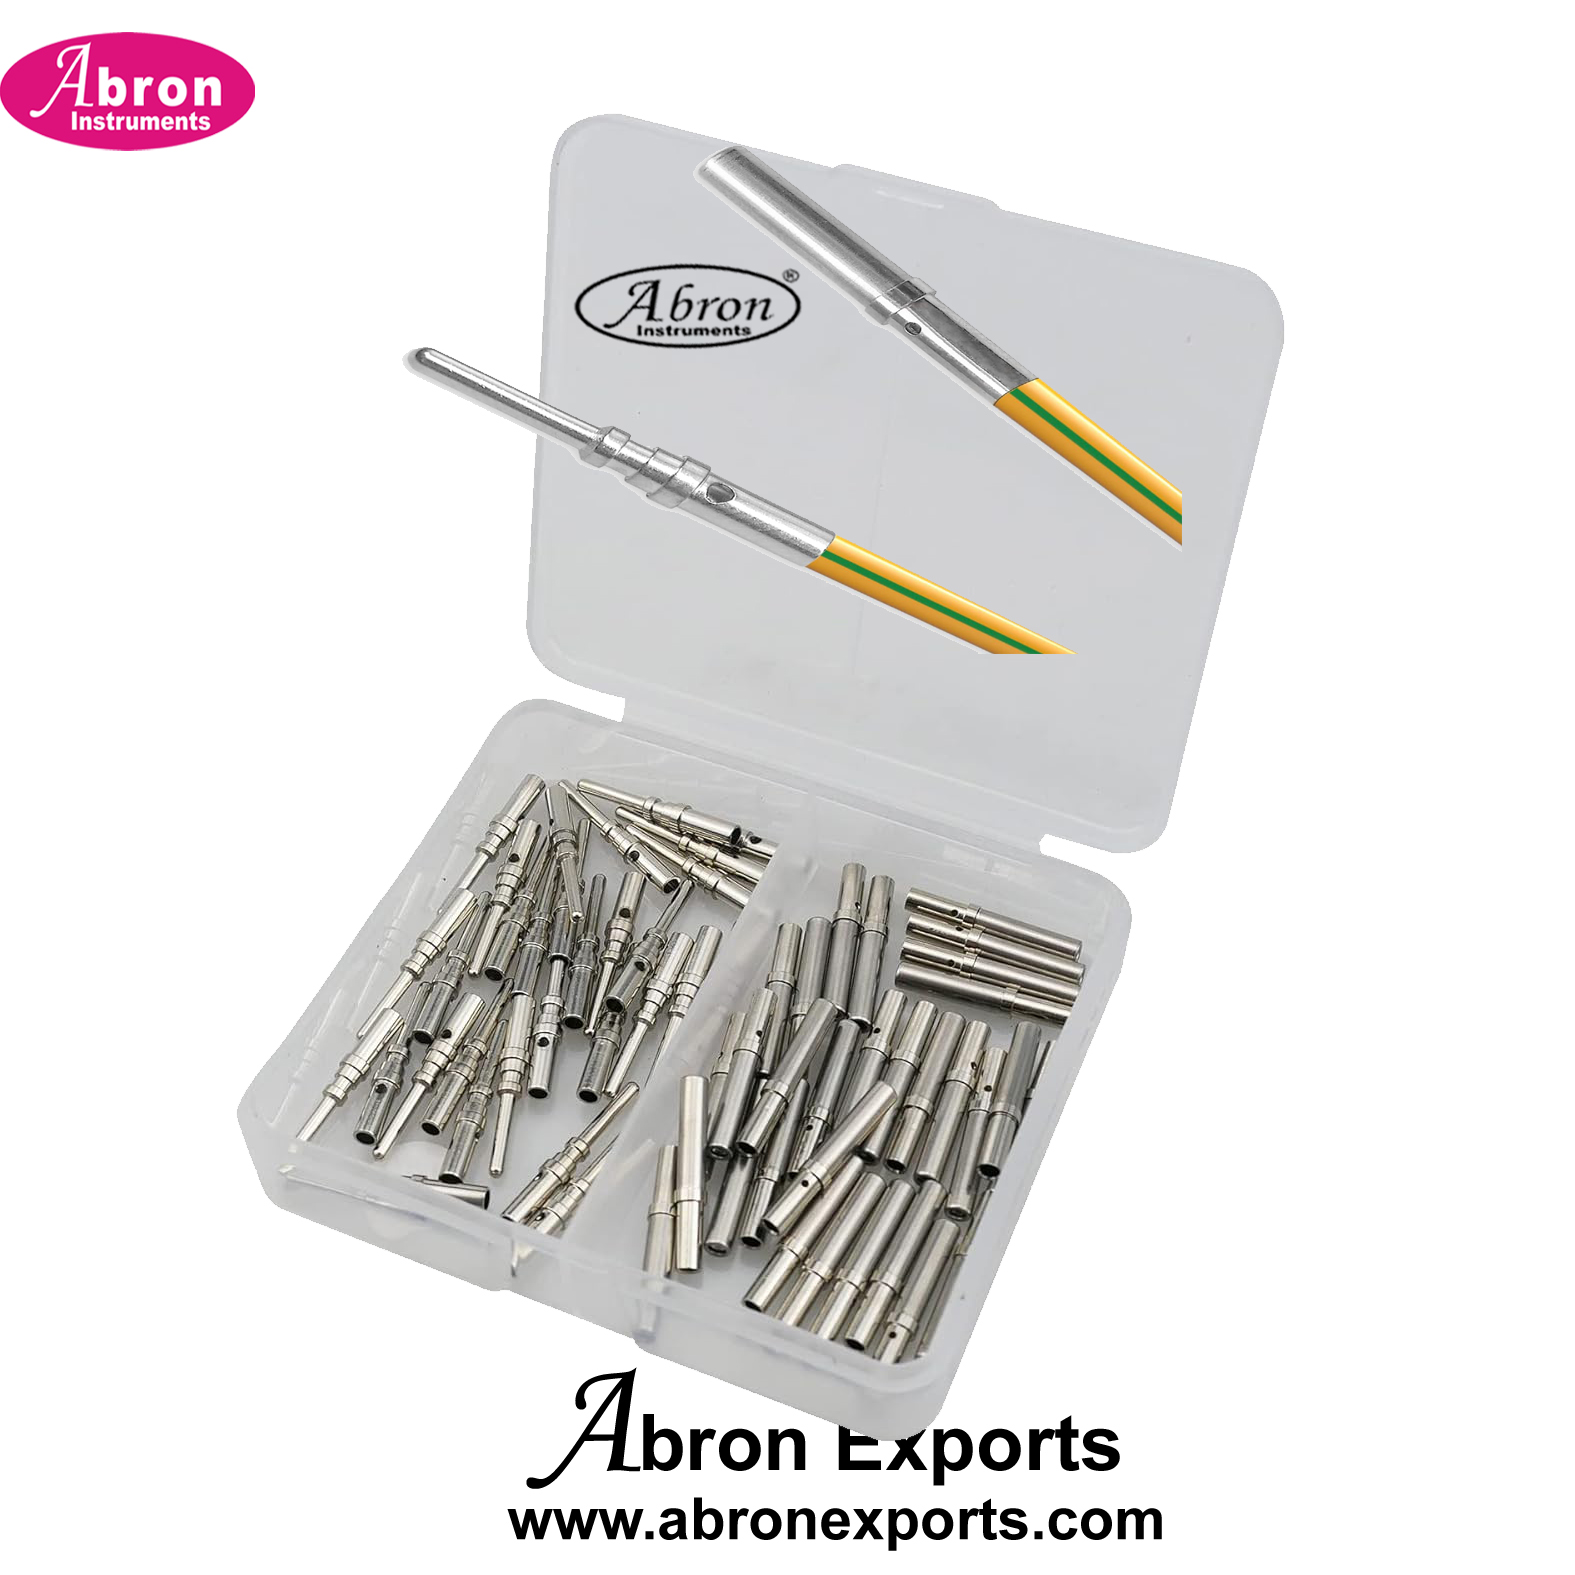 Solid Contract for Wire Male Female Set Size 16 DT Series 30 Pairs Pin And Socket 14AWG Wire in Box Abron AE-1224SC16A 